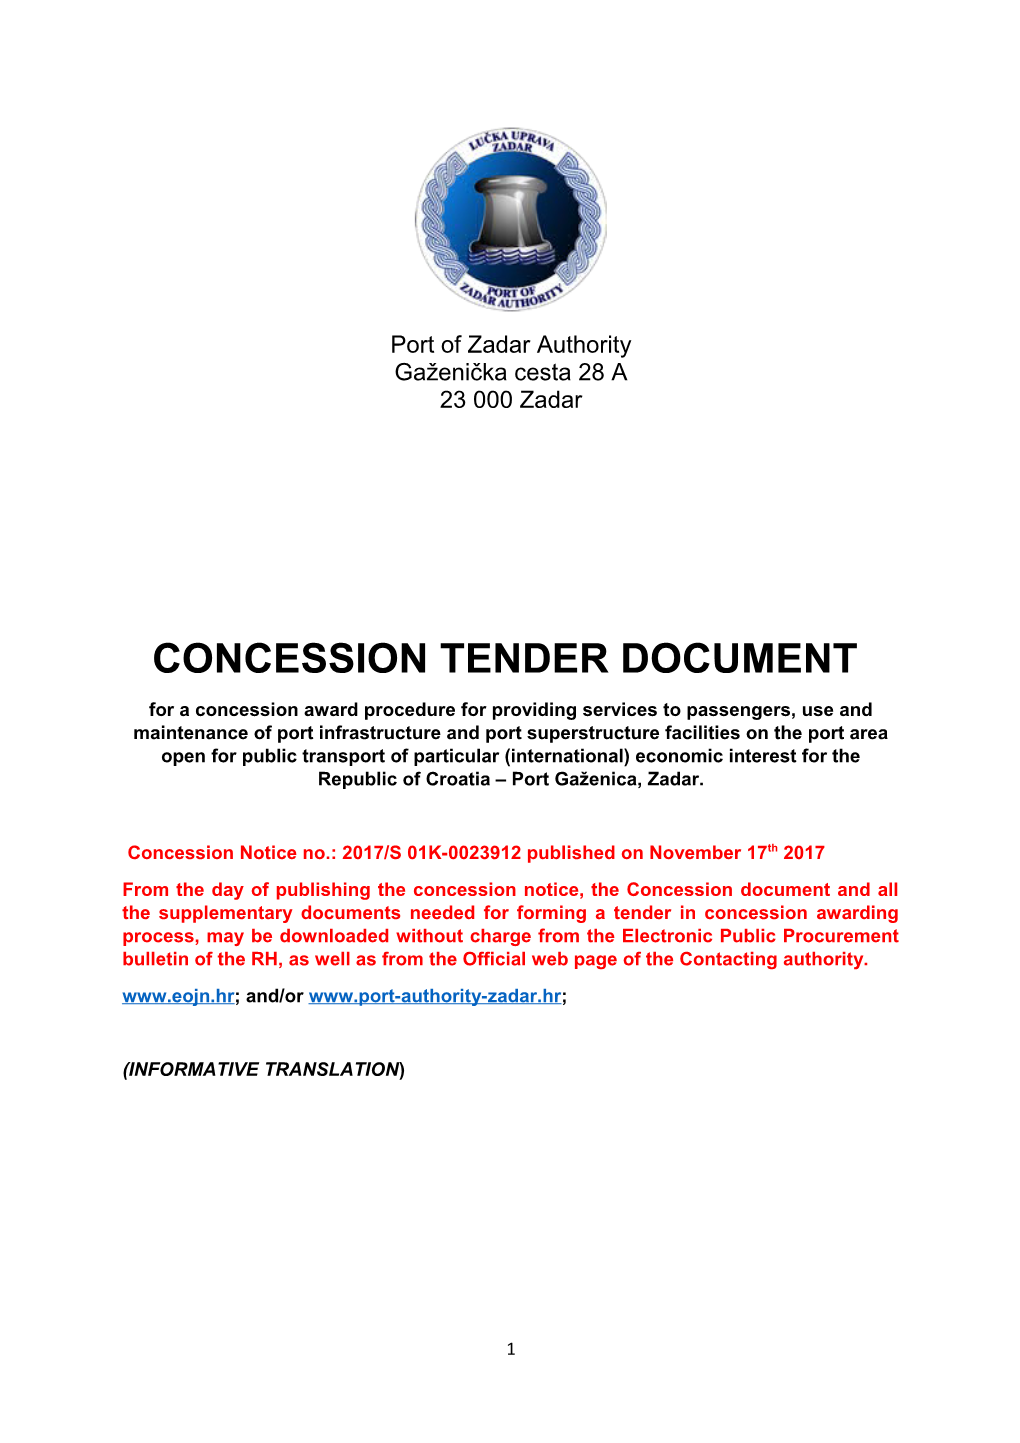 Concession Tender Document